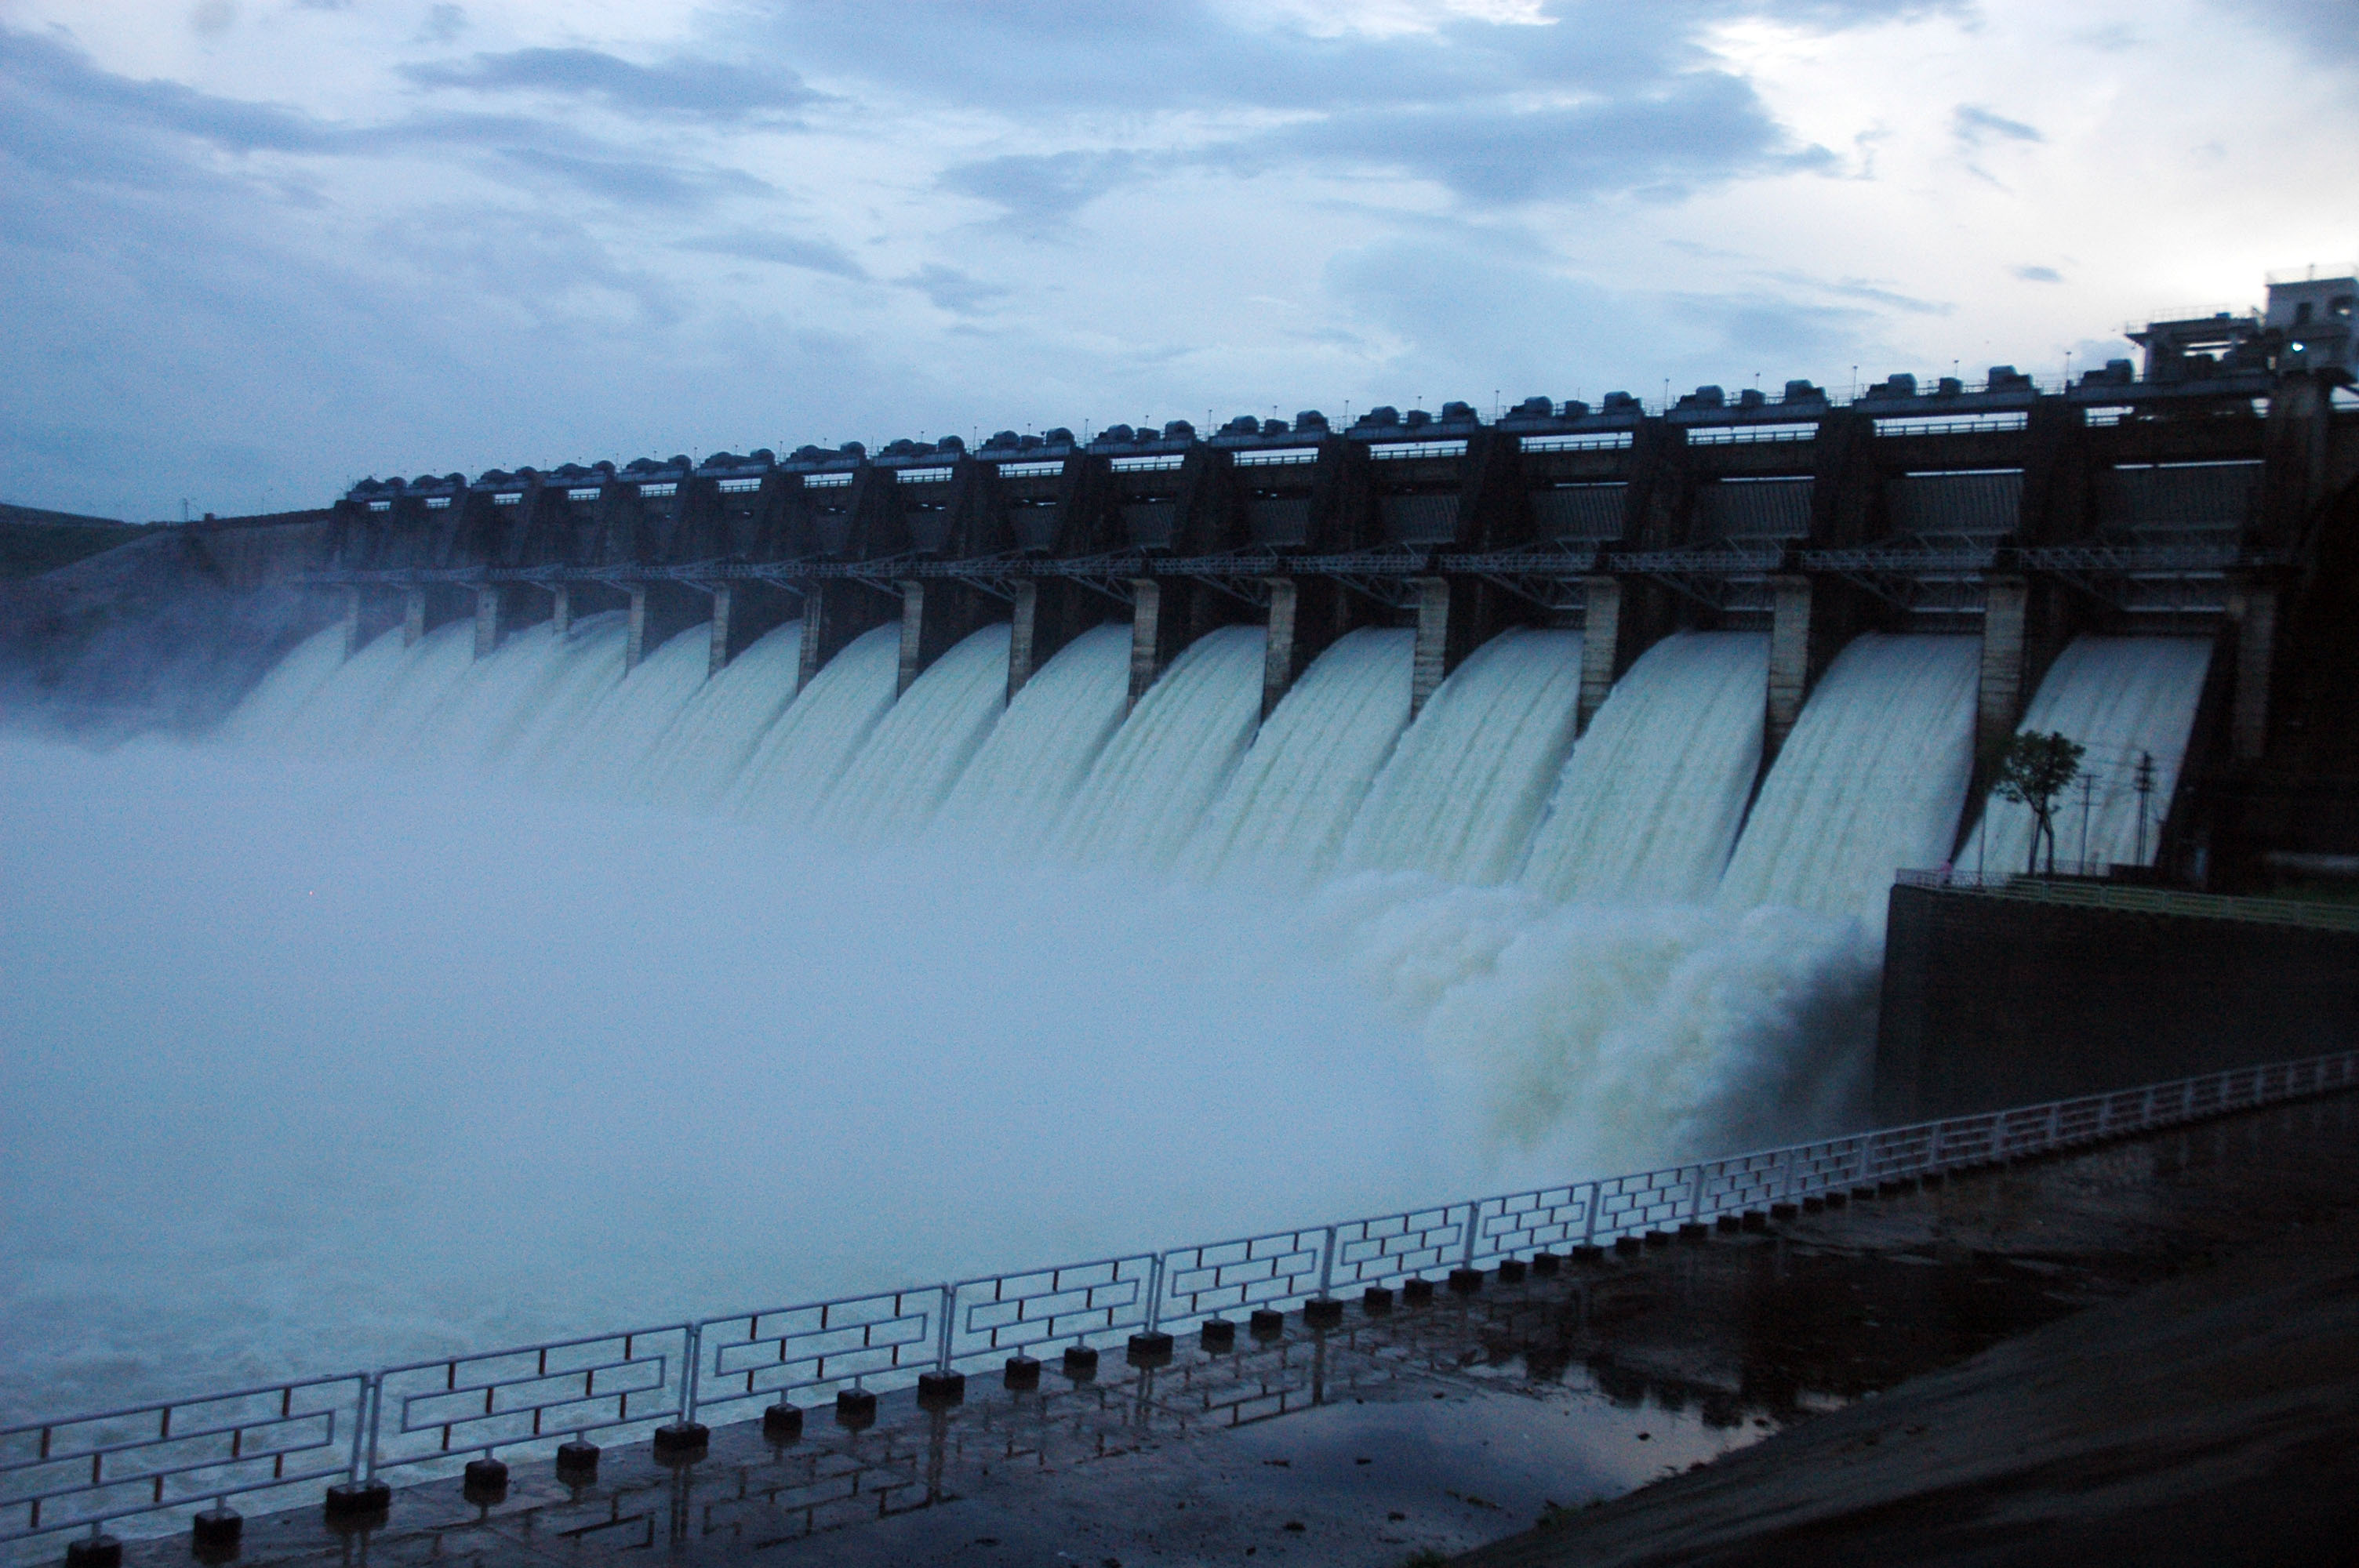 Maahi Dam-Full – The Udaipur :: It's All About Udaipur (Lake City)